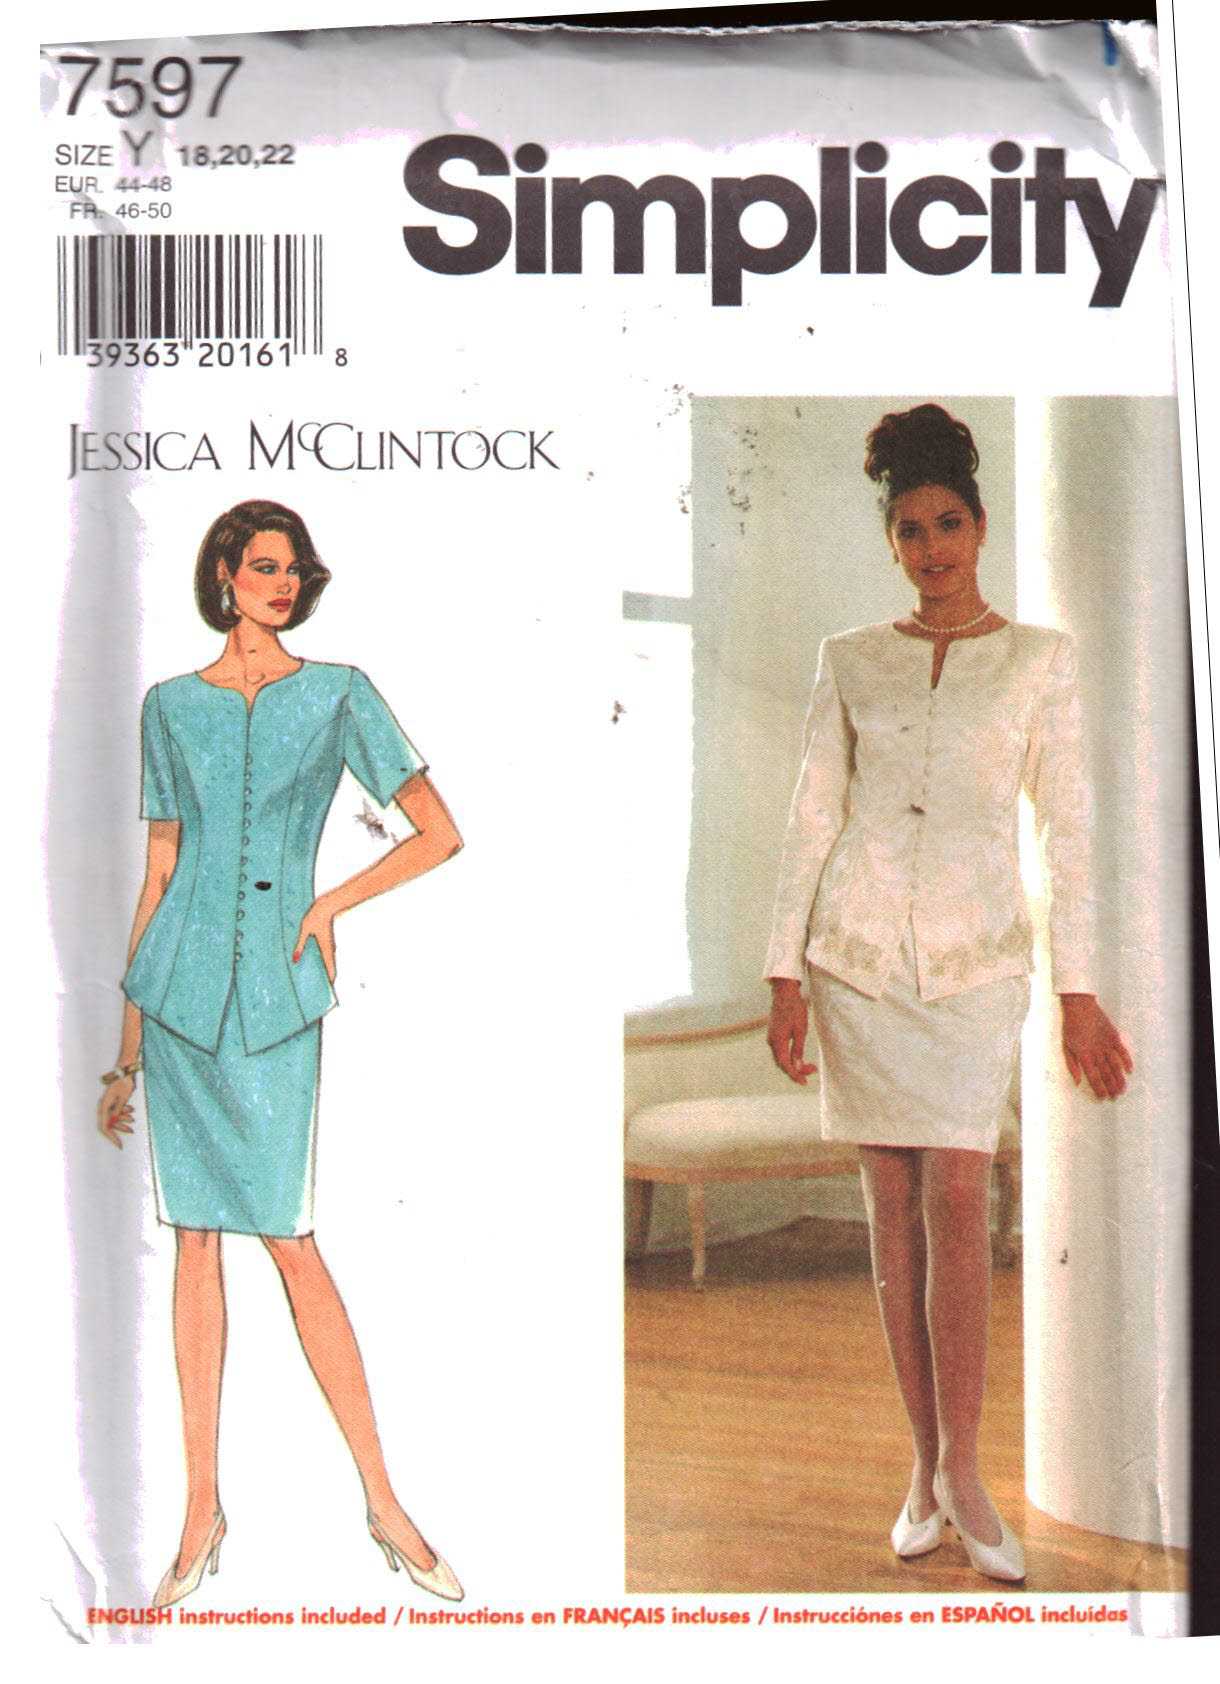 Simplicity 7597 Suit - Jacket, Skirt by Jessica McClintock Size: Y 18-20-22  Uncut Sewing Pattern